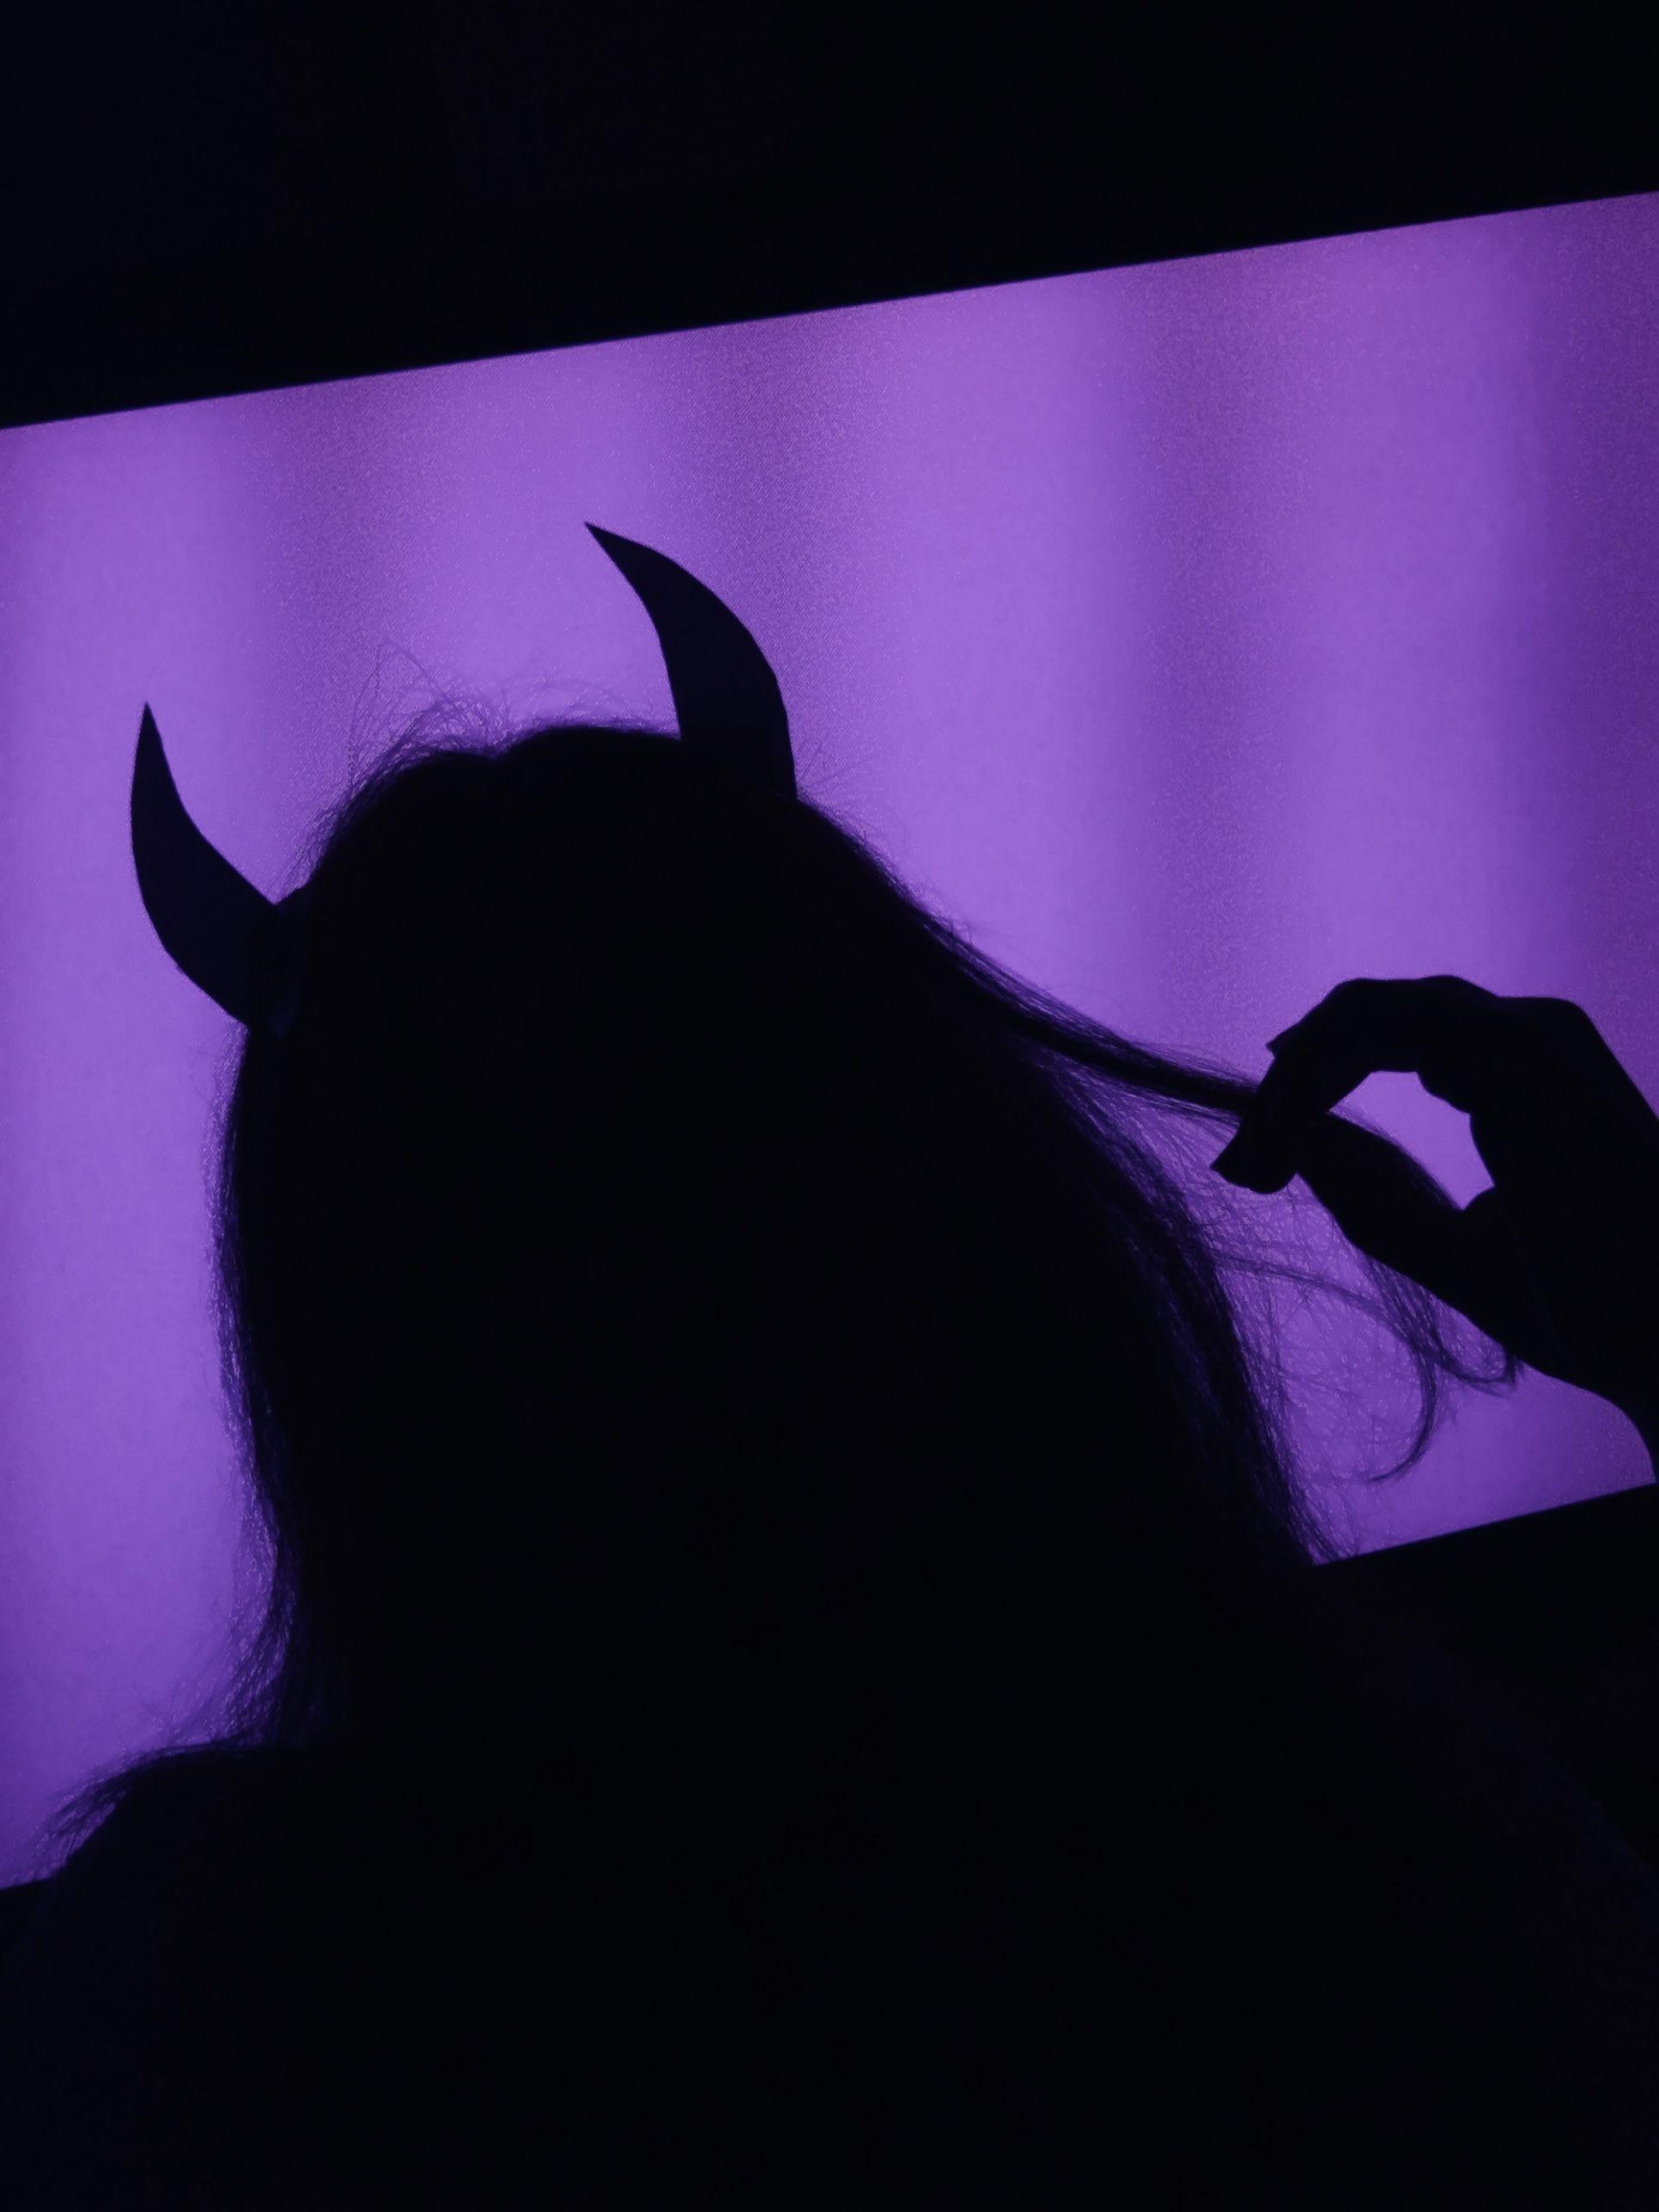 A woman with horns on her head and a purple background - Dark purple, shadow